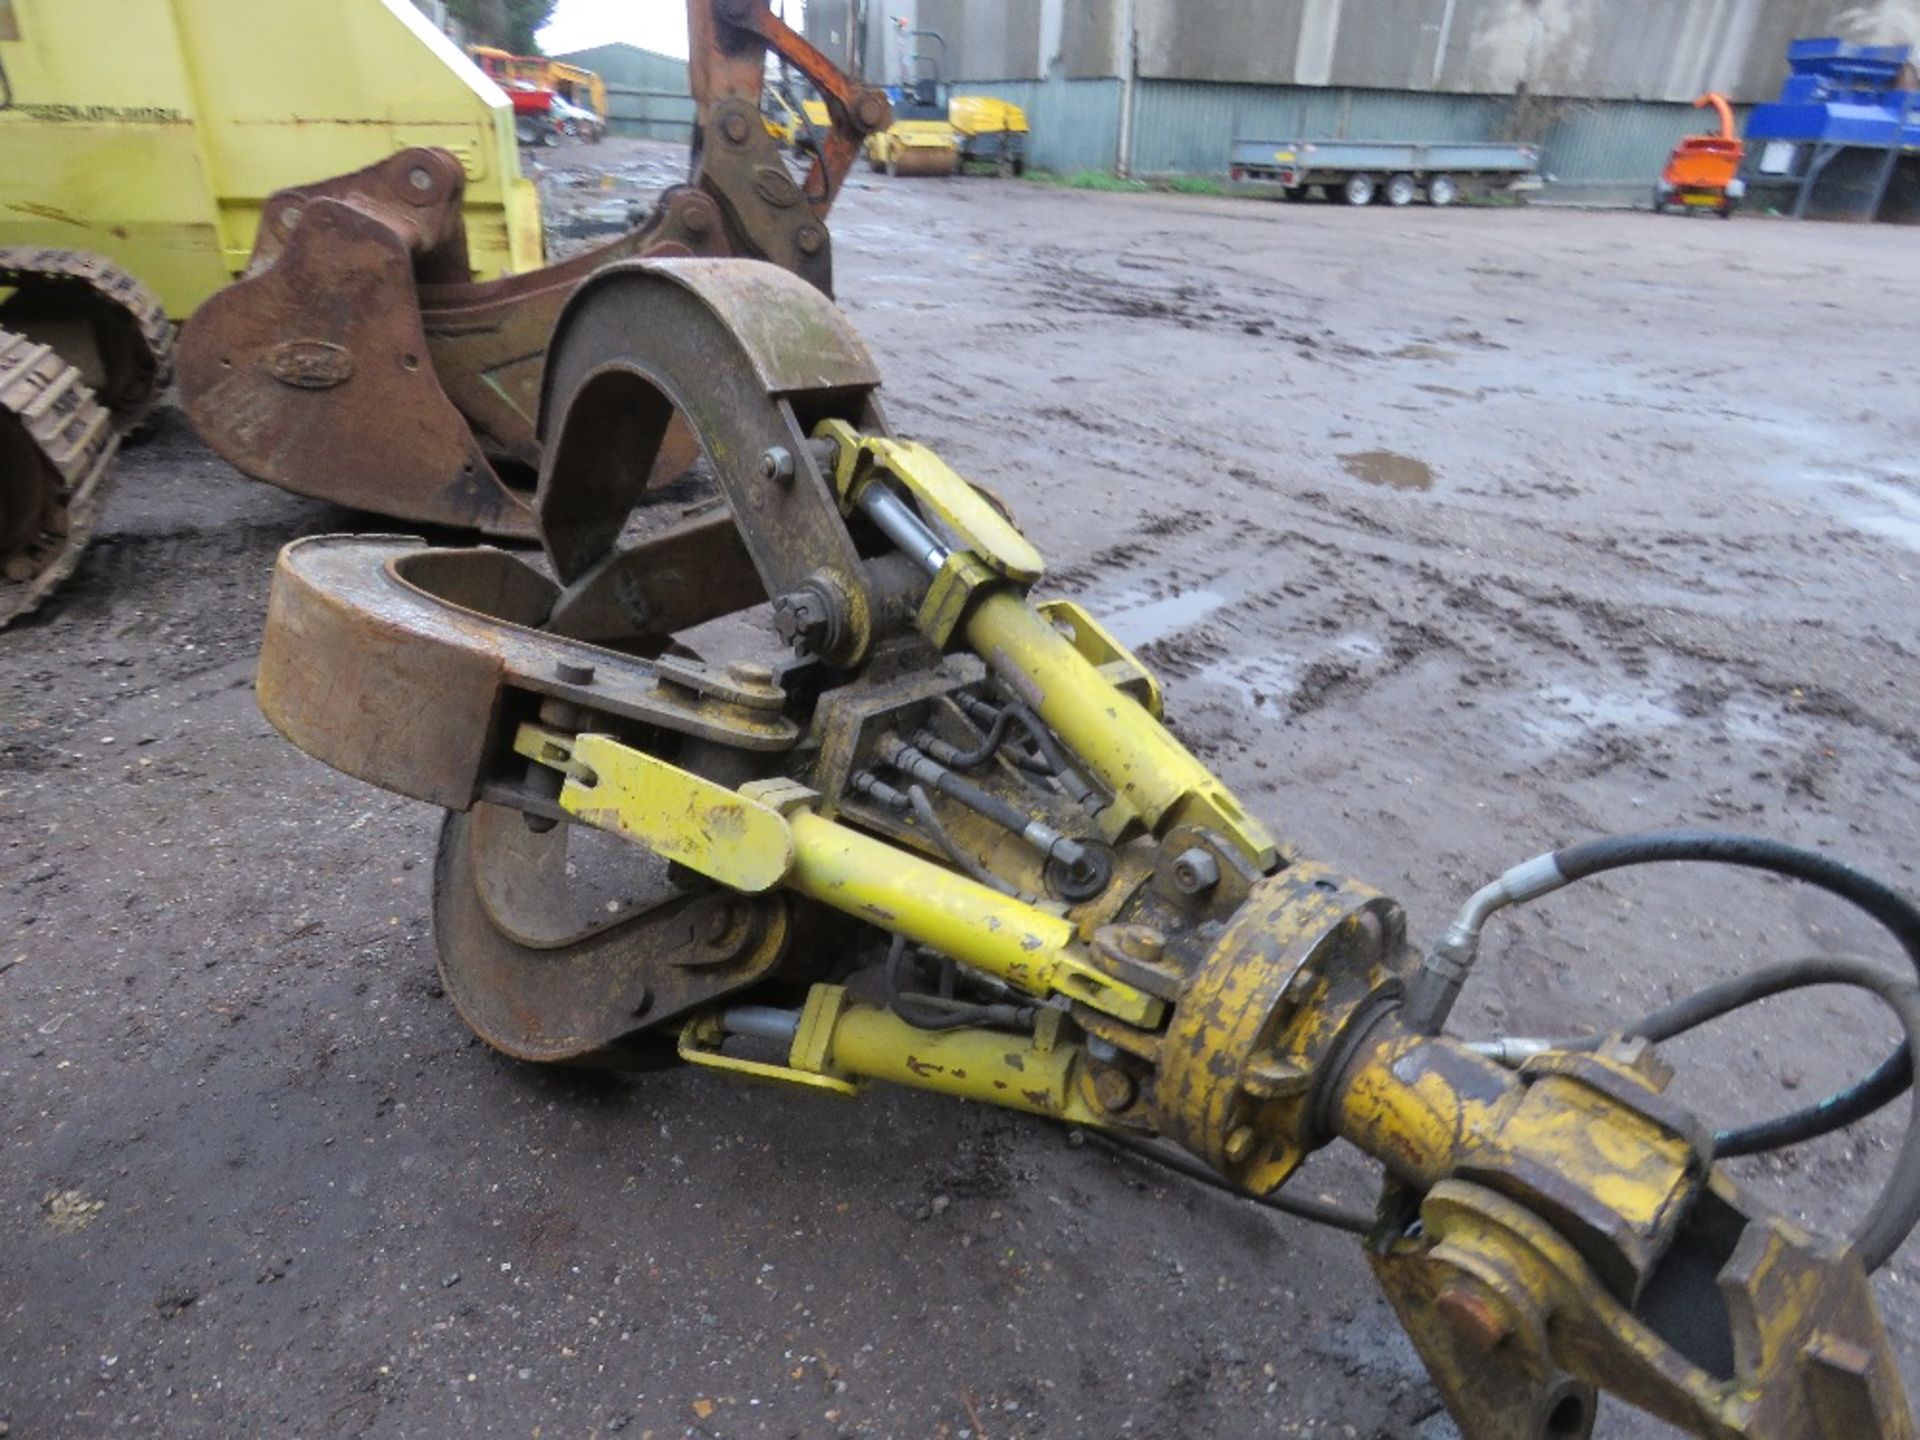 EXCAVATOR MOUNTED 5 TINE SCRAP GRAB WITH ROTATOR ON 65MM PINS, RAMS DONE LITTLE WORK SINCE REFURBISH - Image 3 of 6